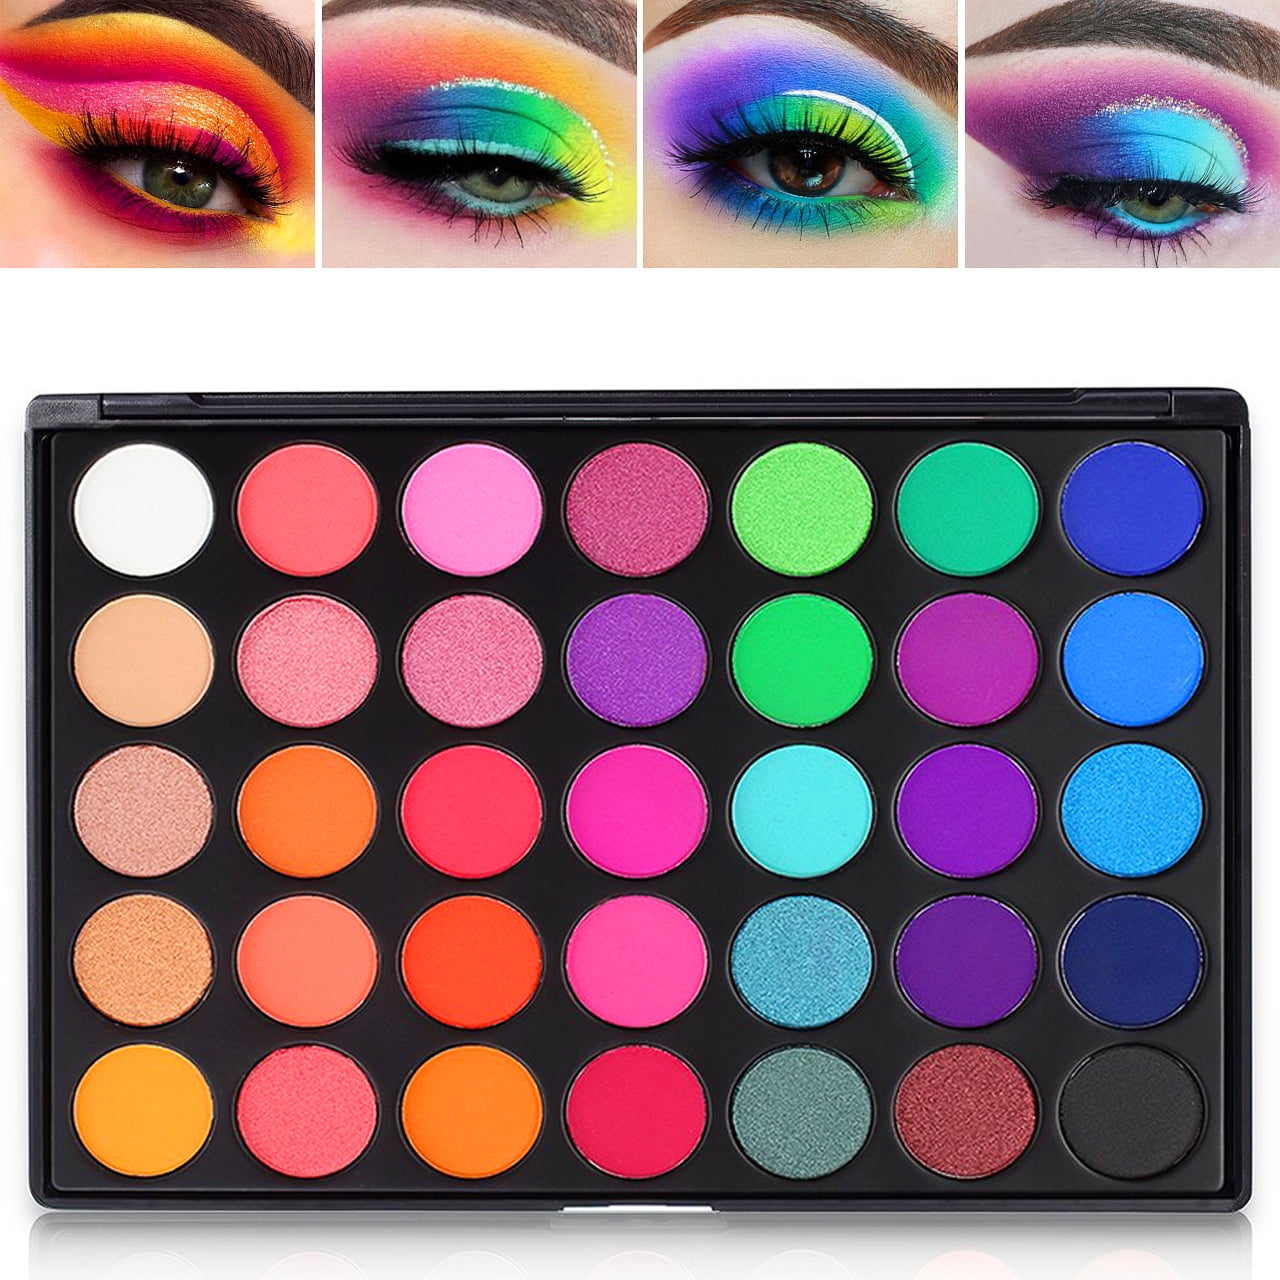 te veel thee Trechter webspin Colorful Eyeshadow Palette Rainbow,DE'LANCI Professional 35 Bright Colors Matte  Shimmer Eye Shadow Makeup Pallete Shades,Long Lasting and High Pigment  Silky Powder Cosmetics Set - Walmart.com